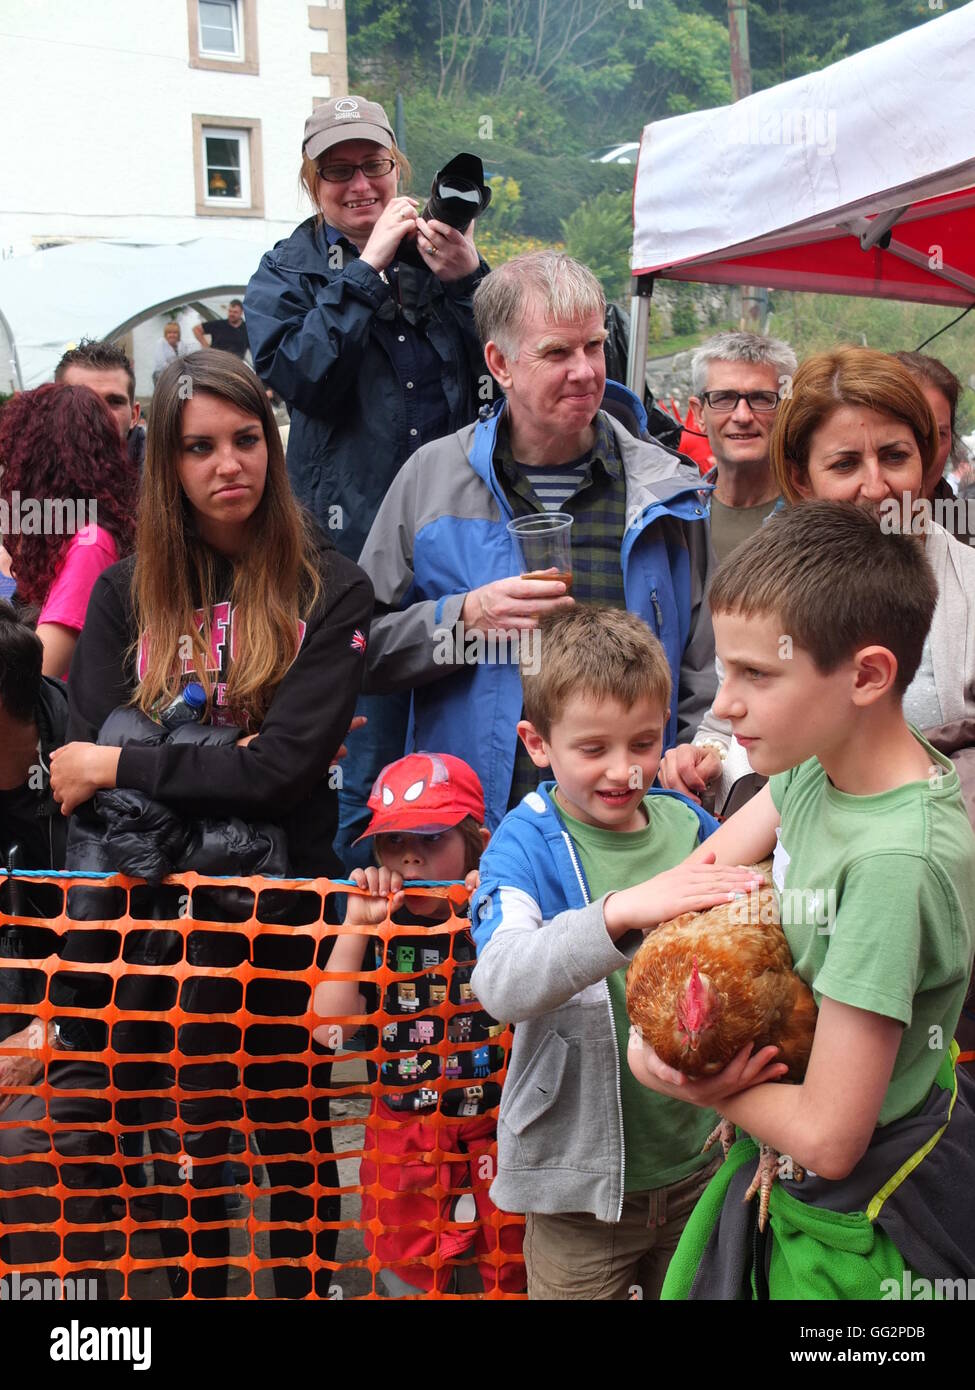 Bonsall World Championship Hen Racing. Young boy waiting to enter his chicken into the contest. Stock Photo